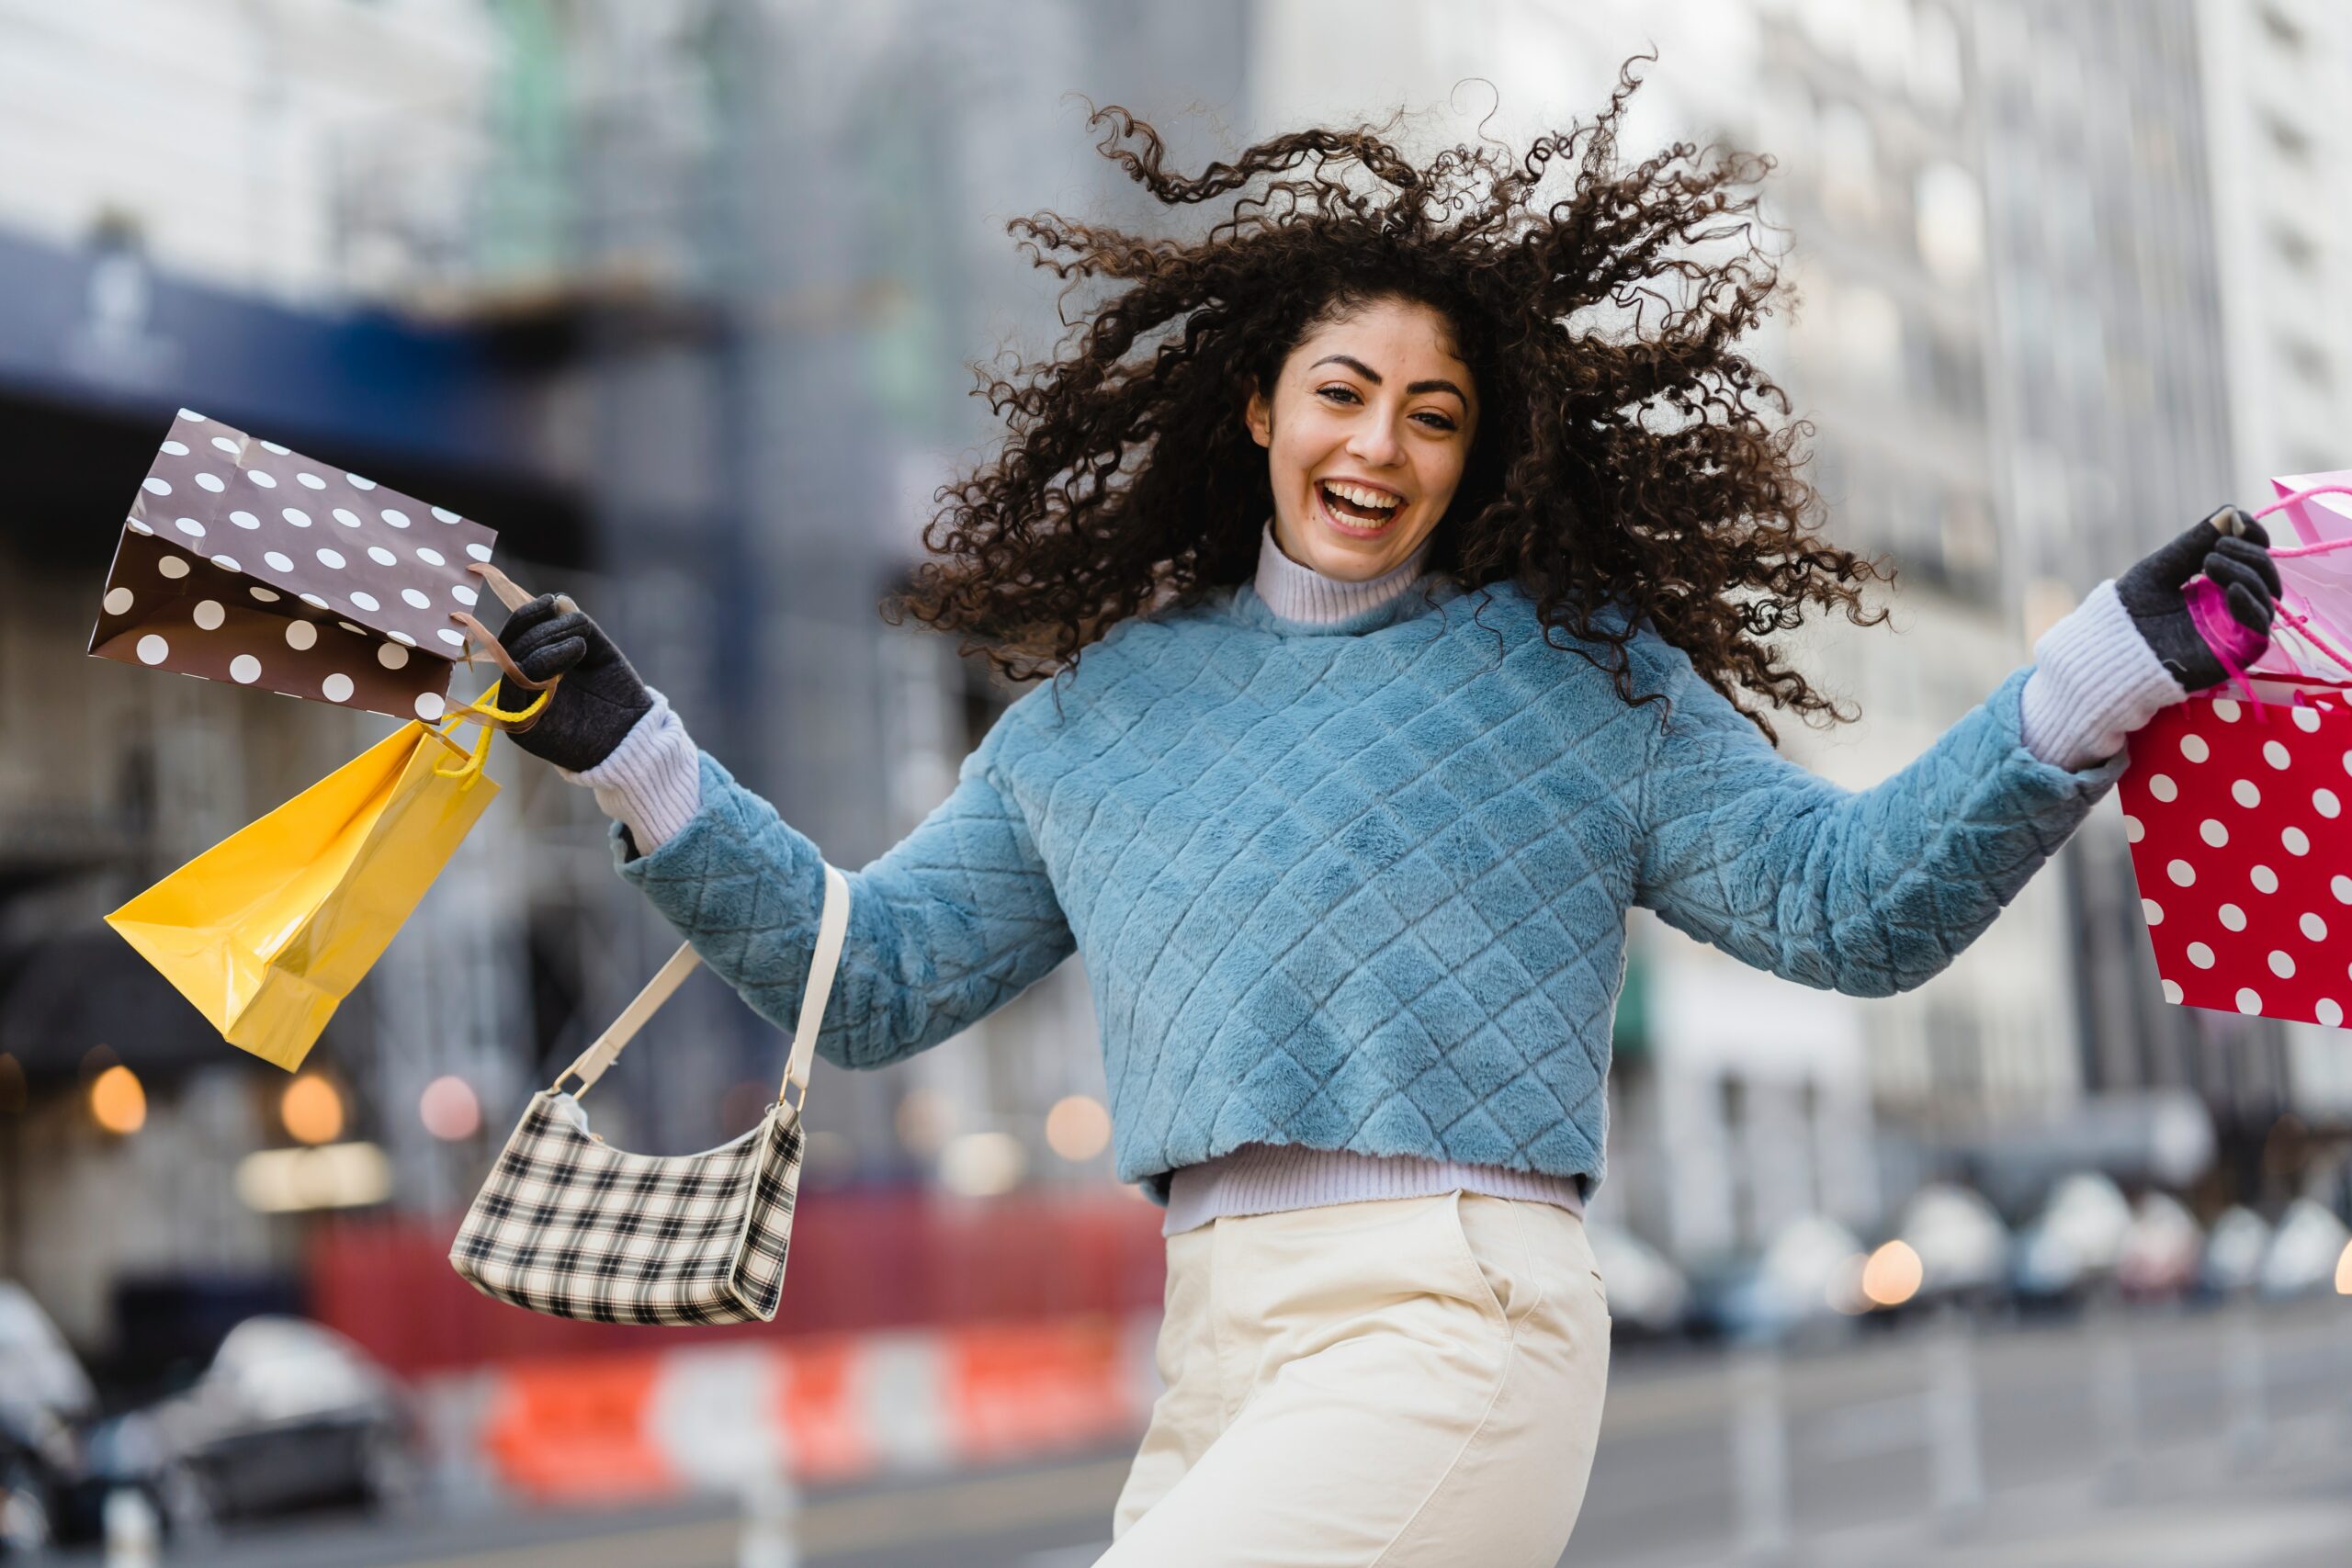 Woman smiling while holding her purse and shopping bags